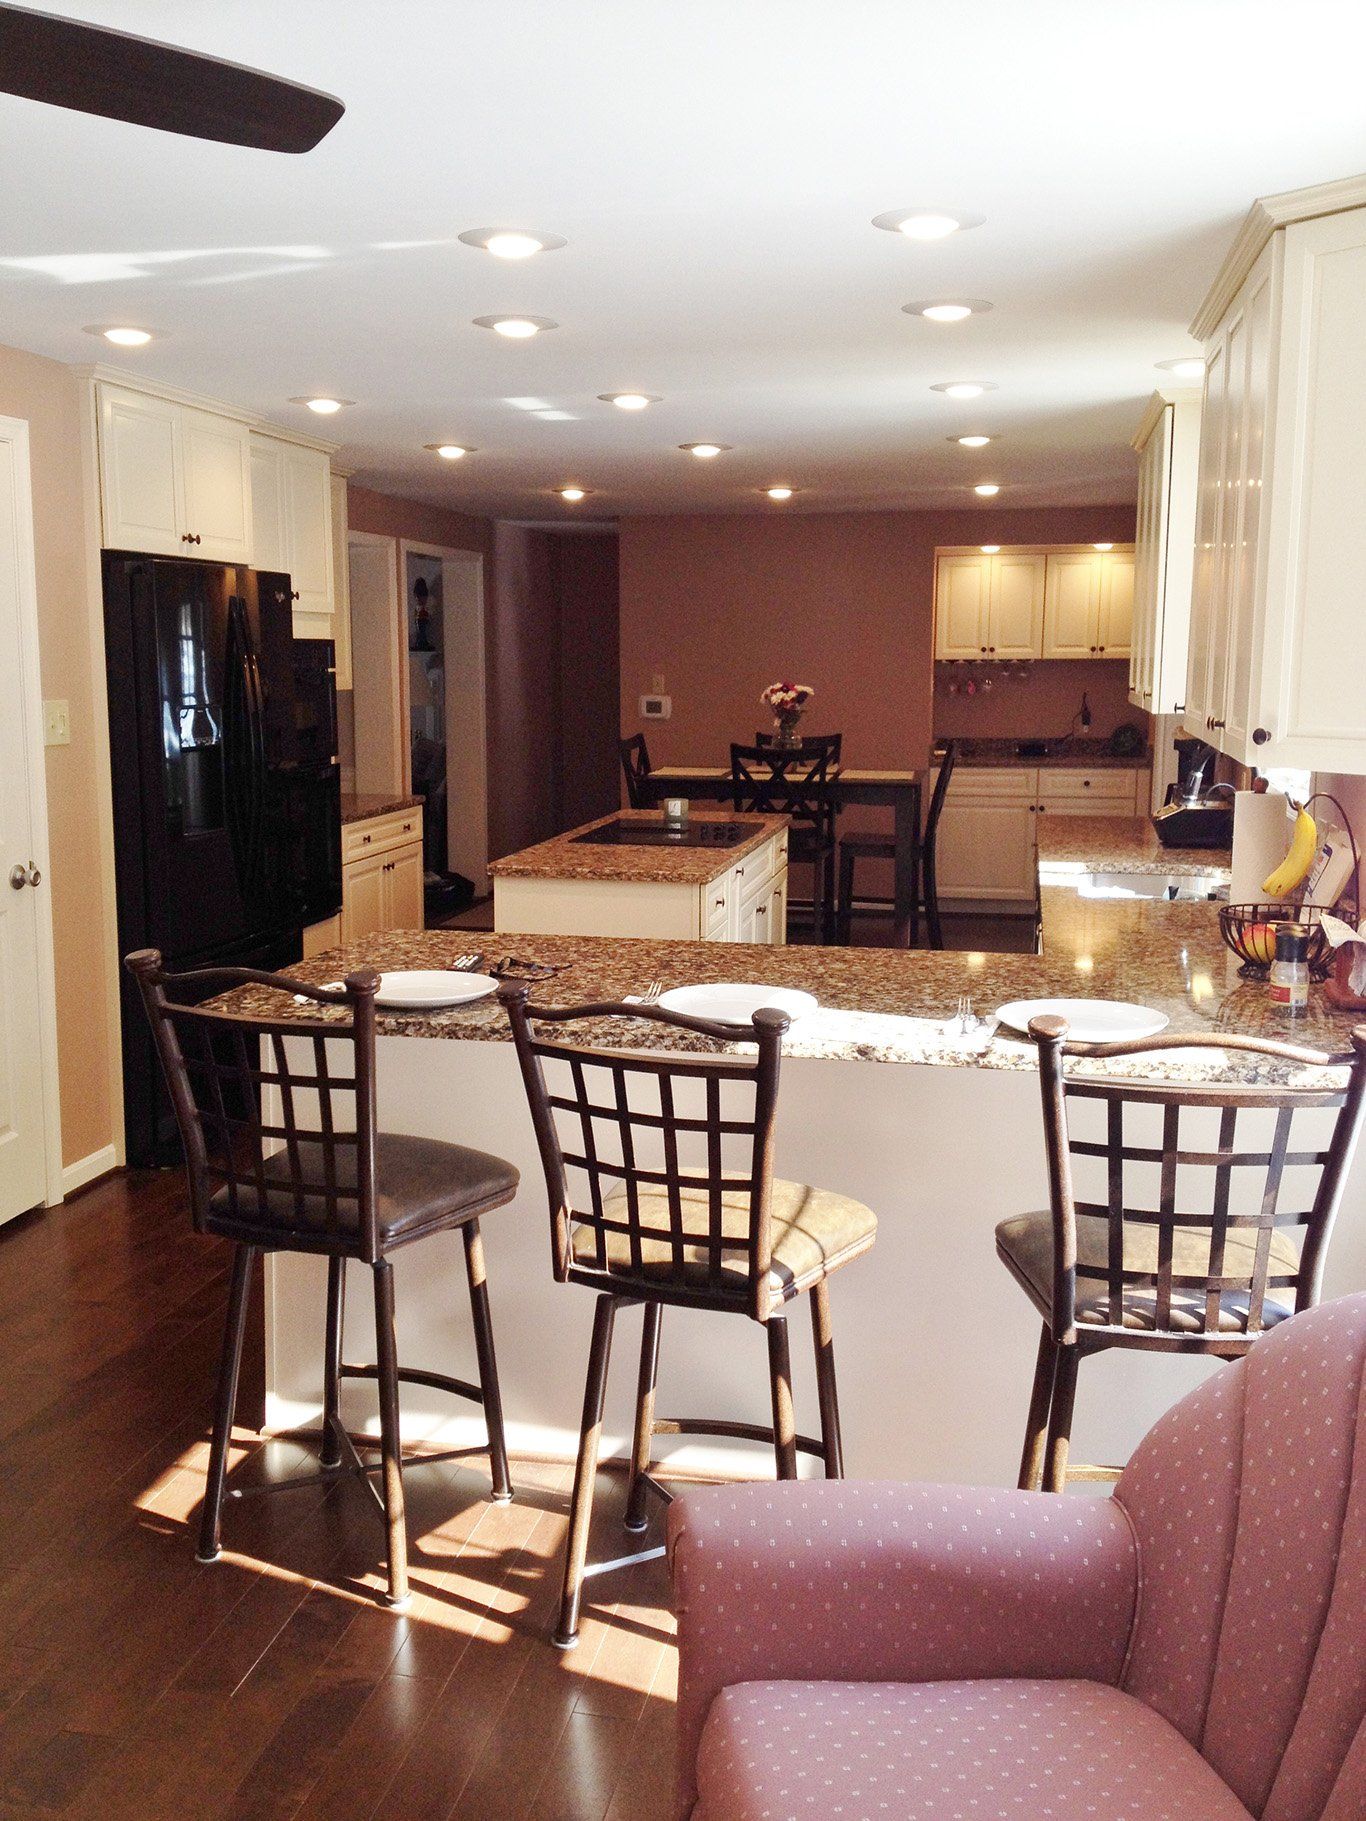 Modern Dining Room - Home Improvement Services in Glen Arm, MD